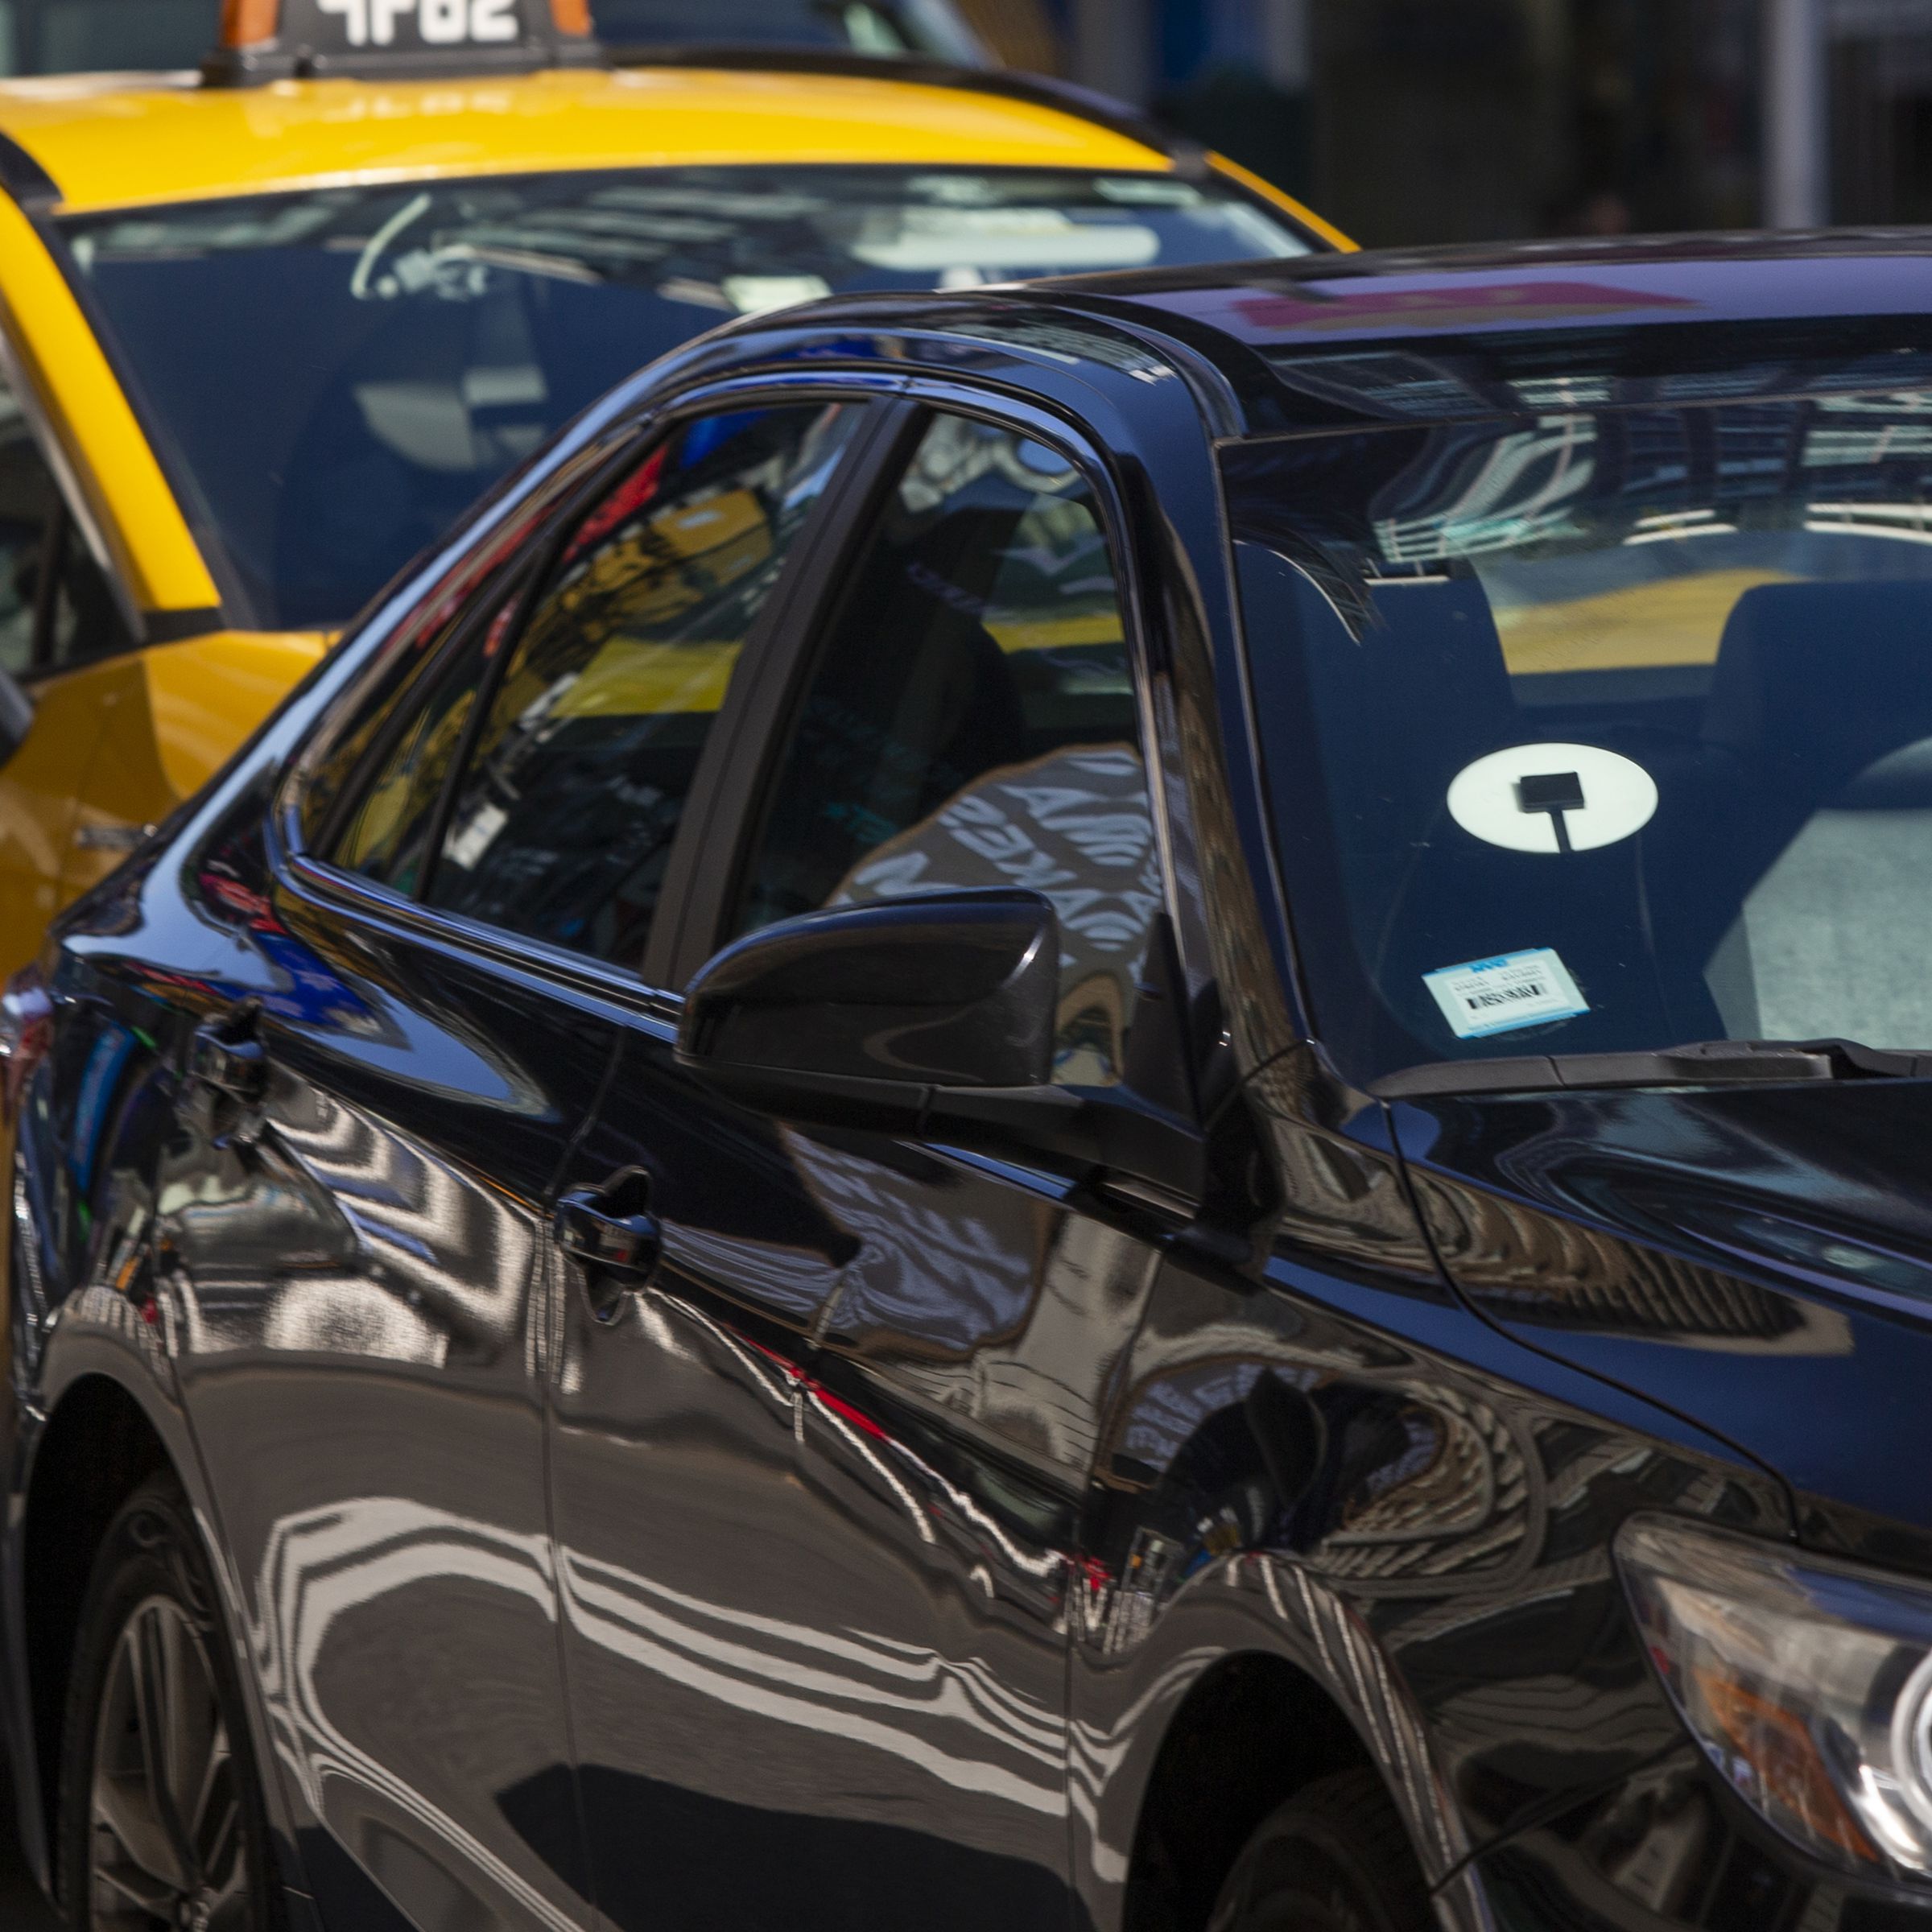 NYC bill could put Uber and yellow Cabs on single app platform